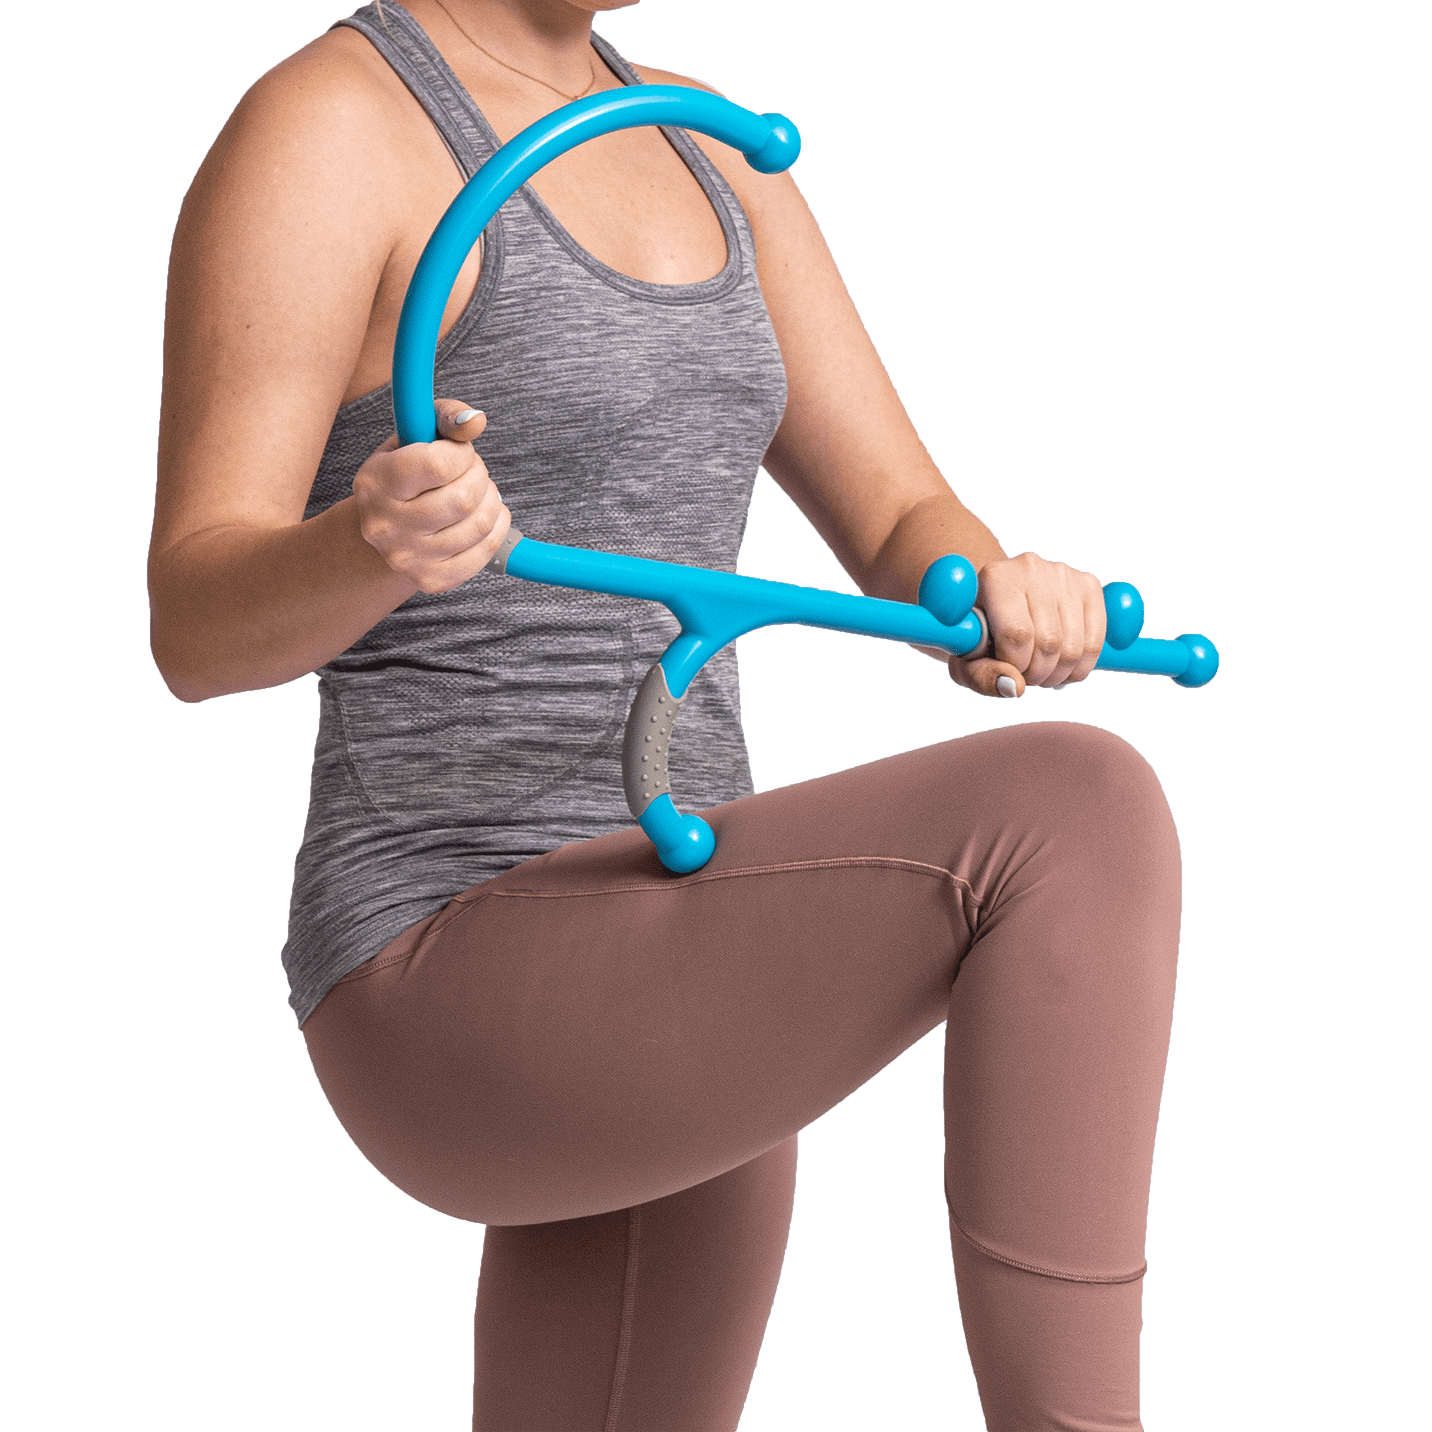 ProStretch Knot Bad Massage Cane for Trigger Points & Muscle Knots